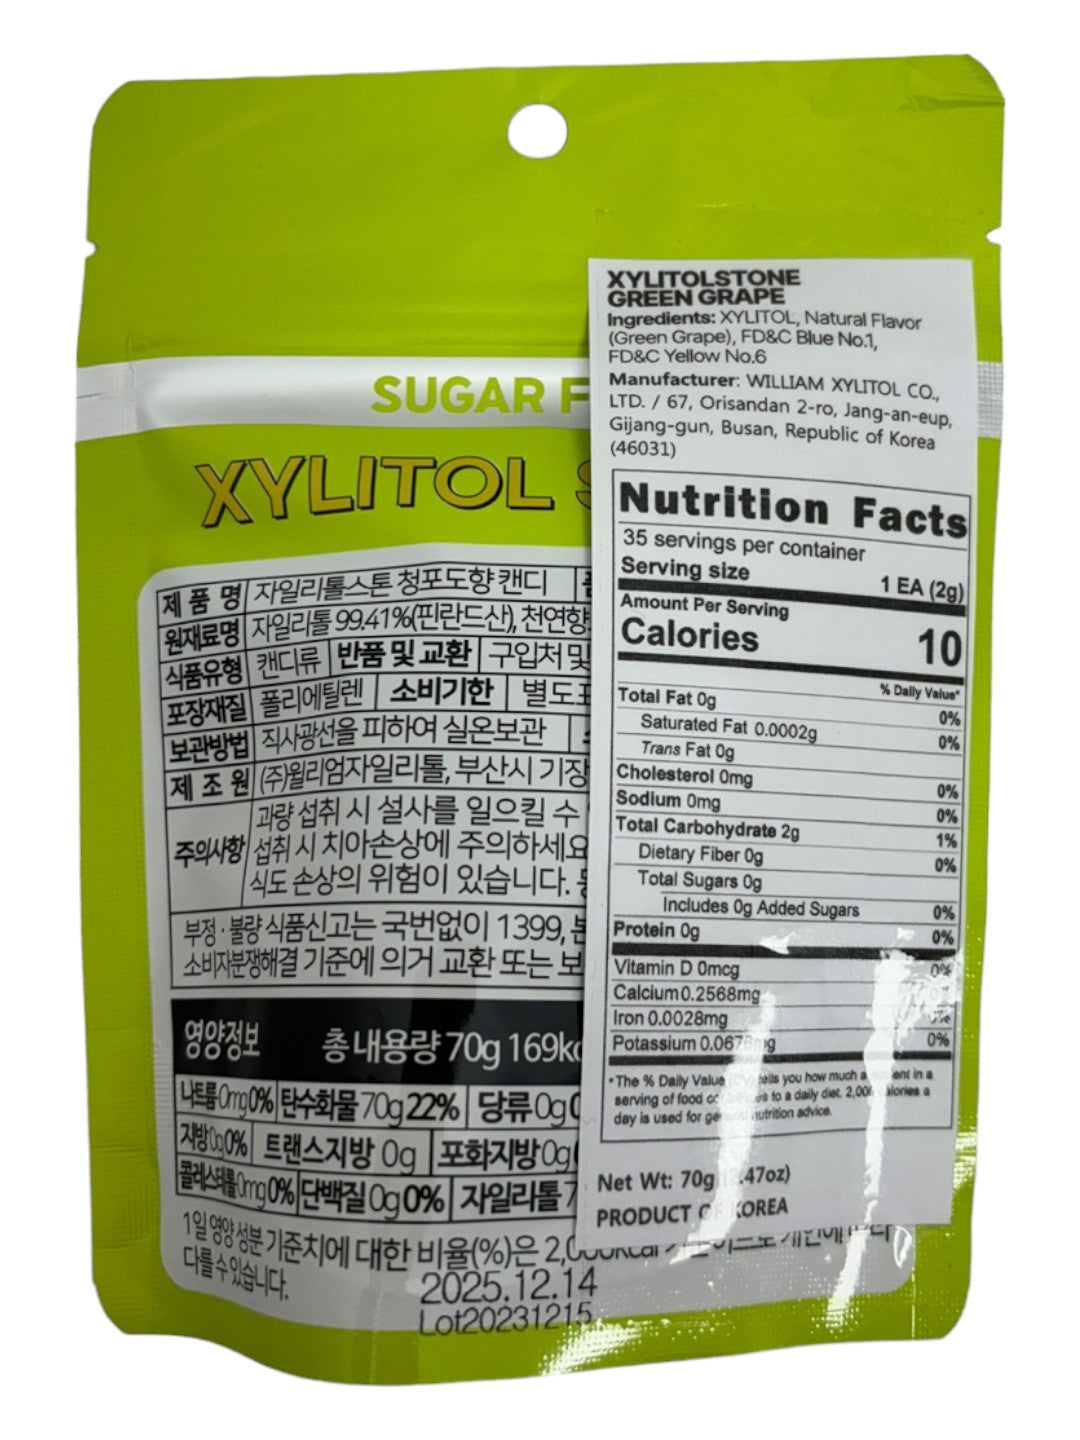 Xylitol Stone Sugar Free Candy 70G Resealable Pouch, Green Grape